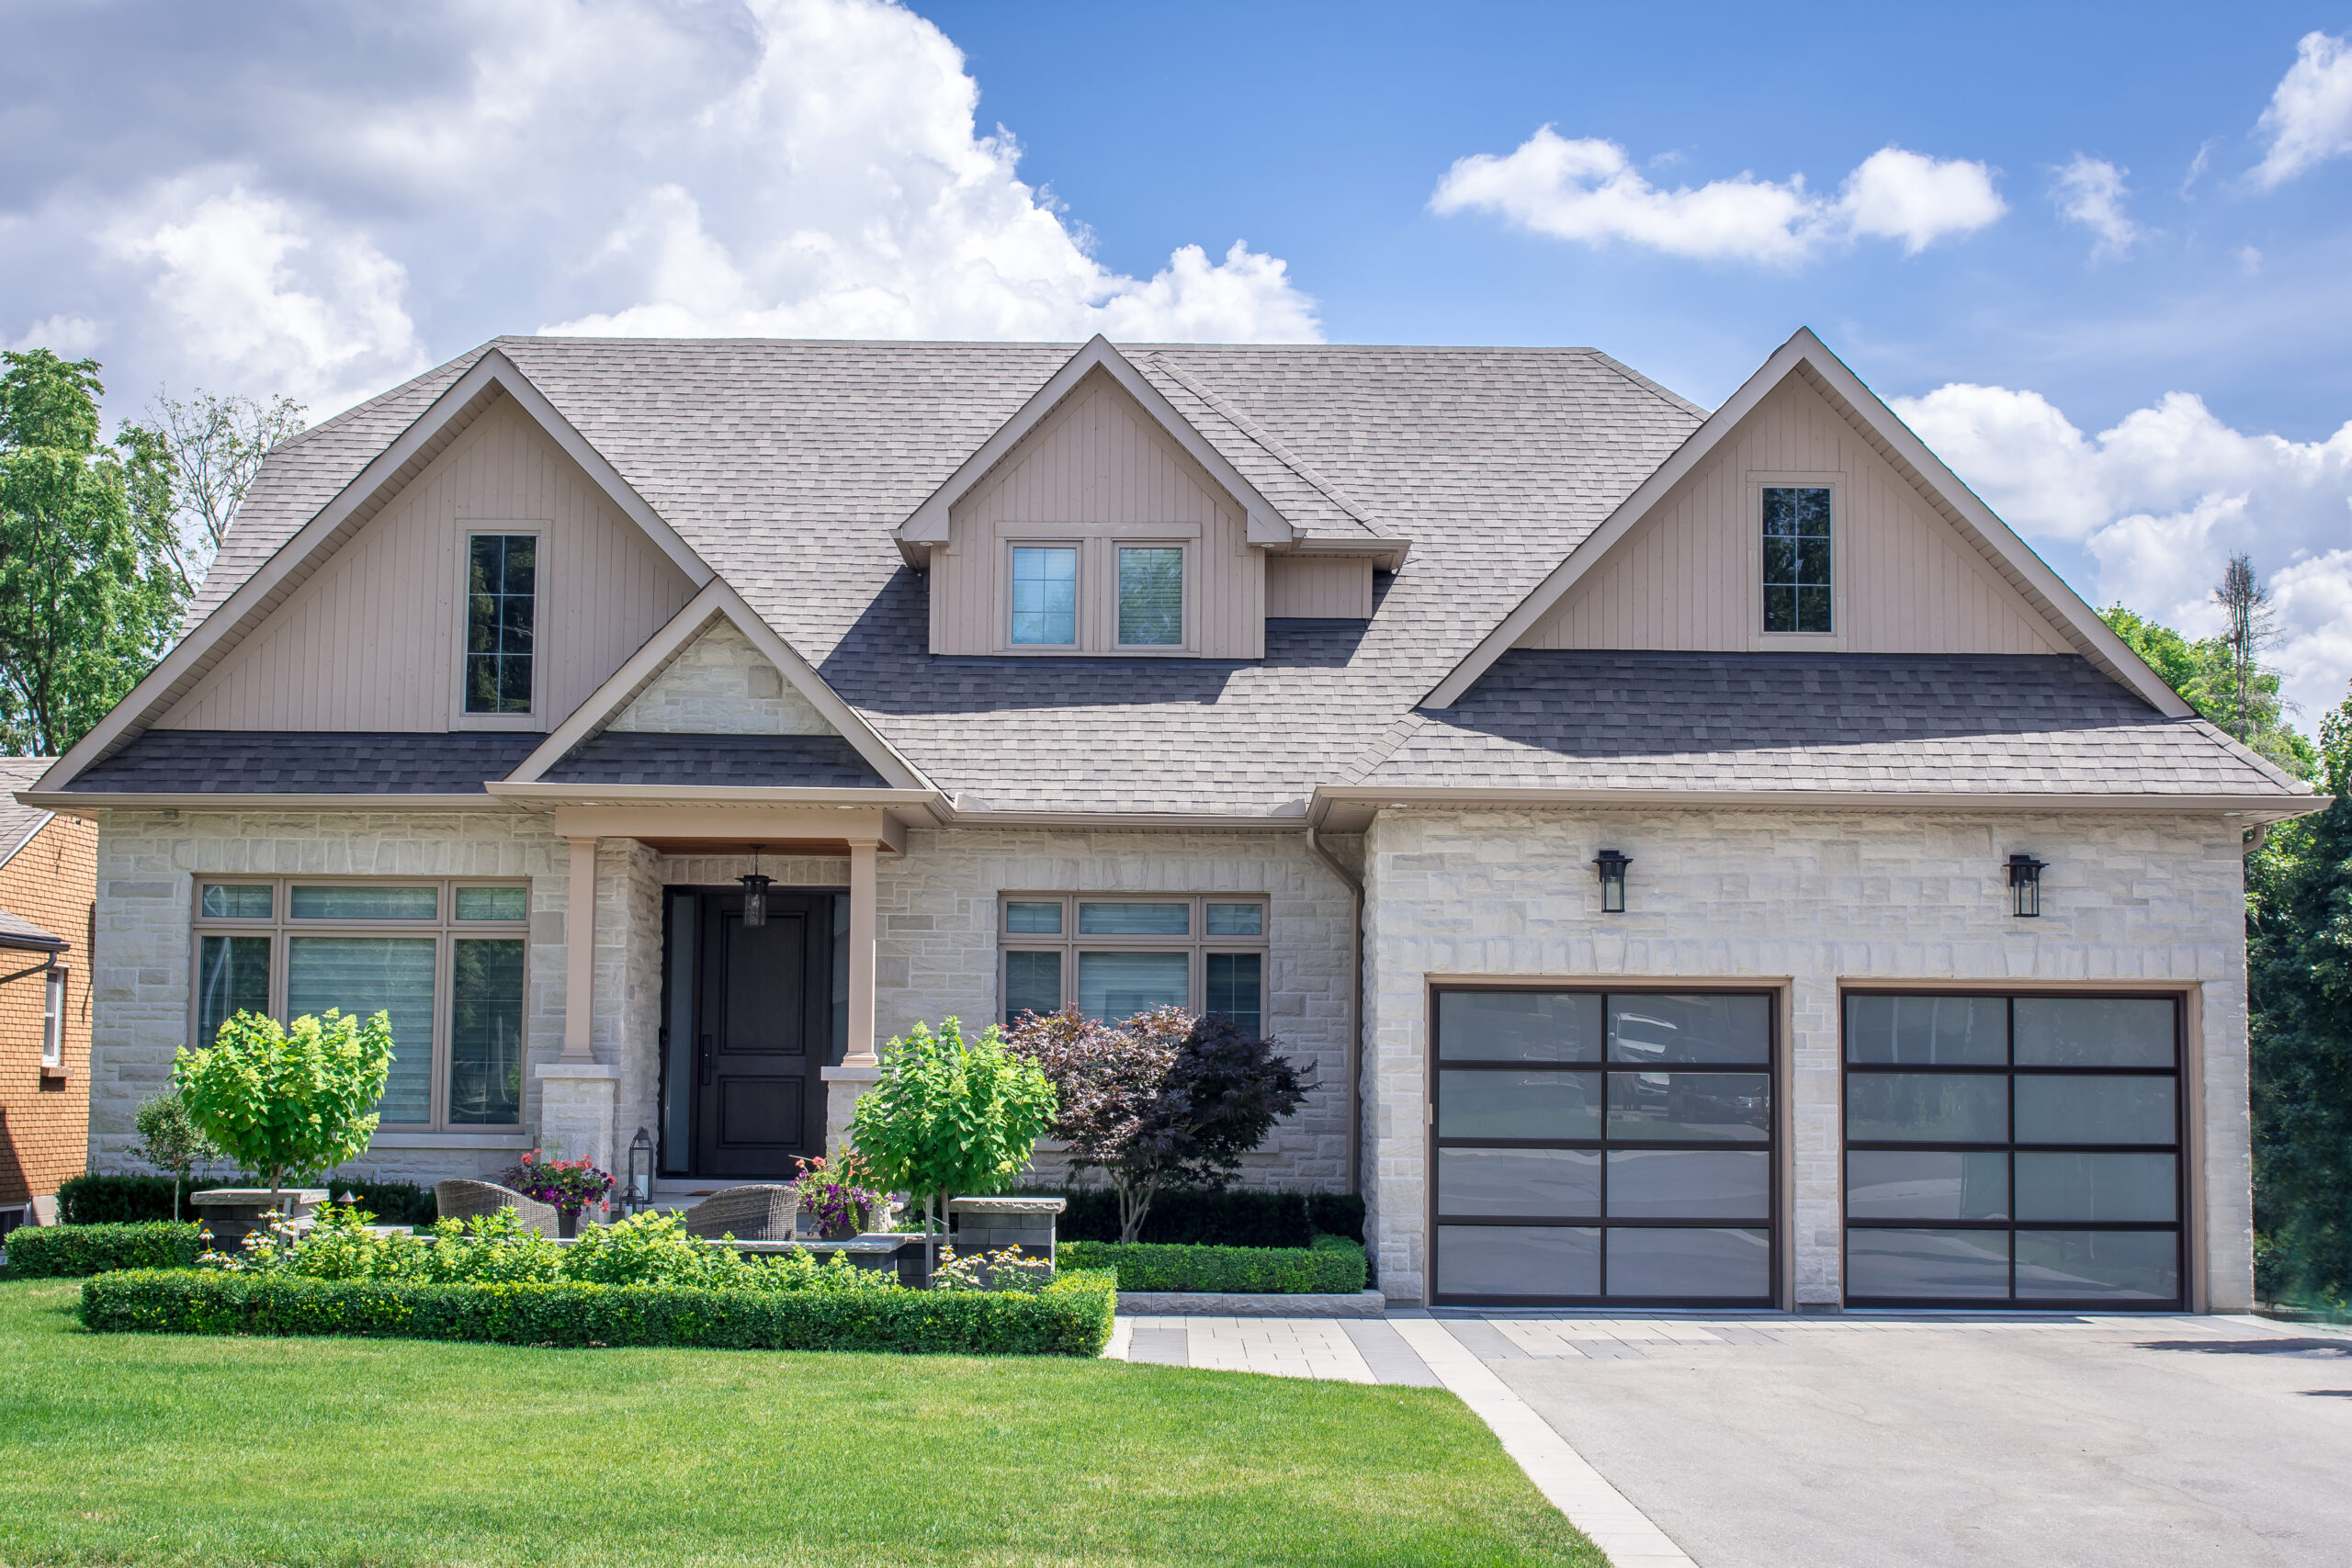 Choosing the Right Garage Door Style for Your Home.